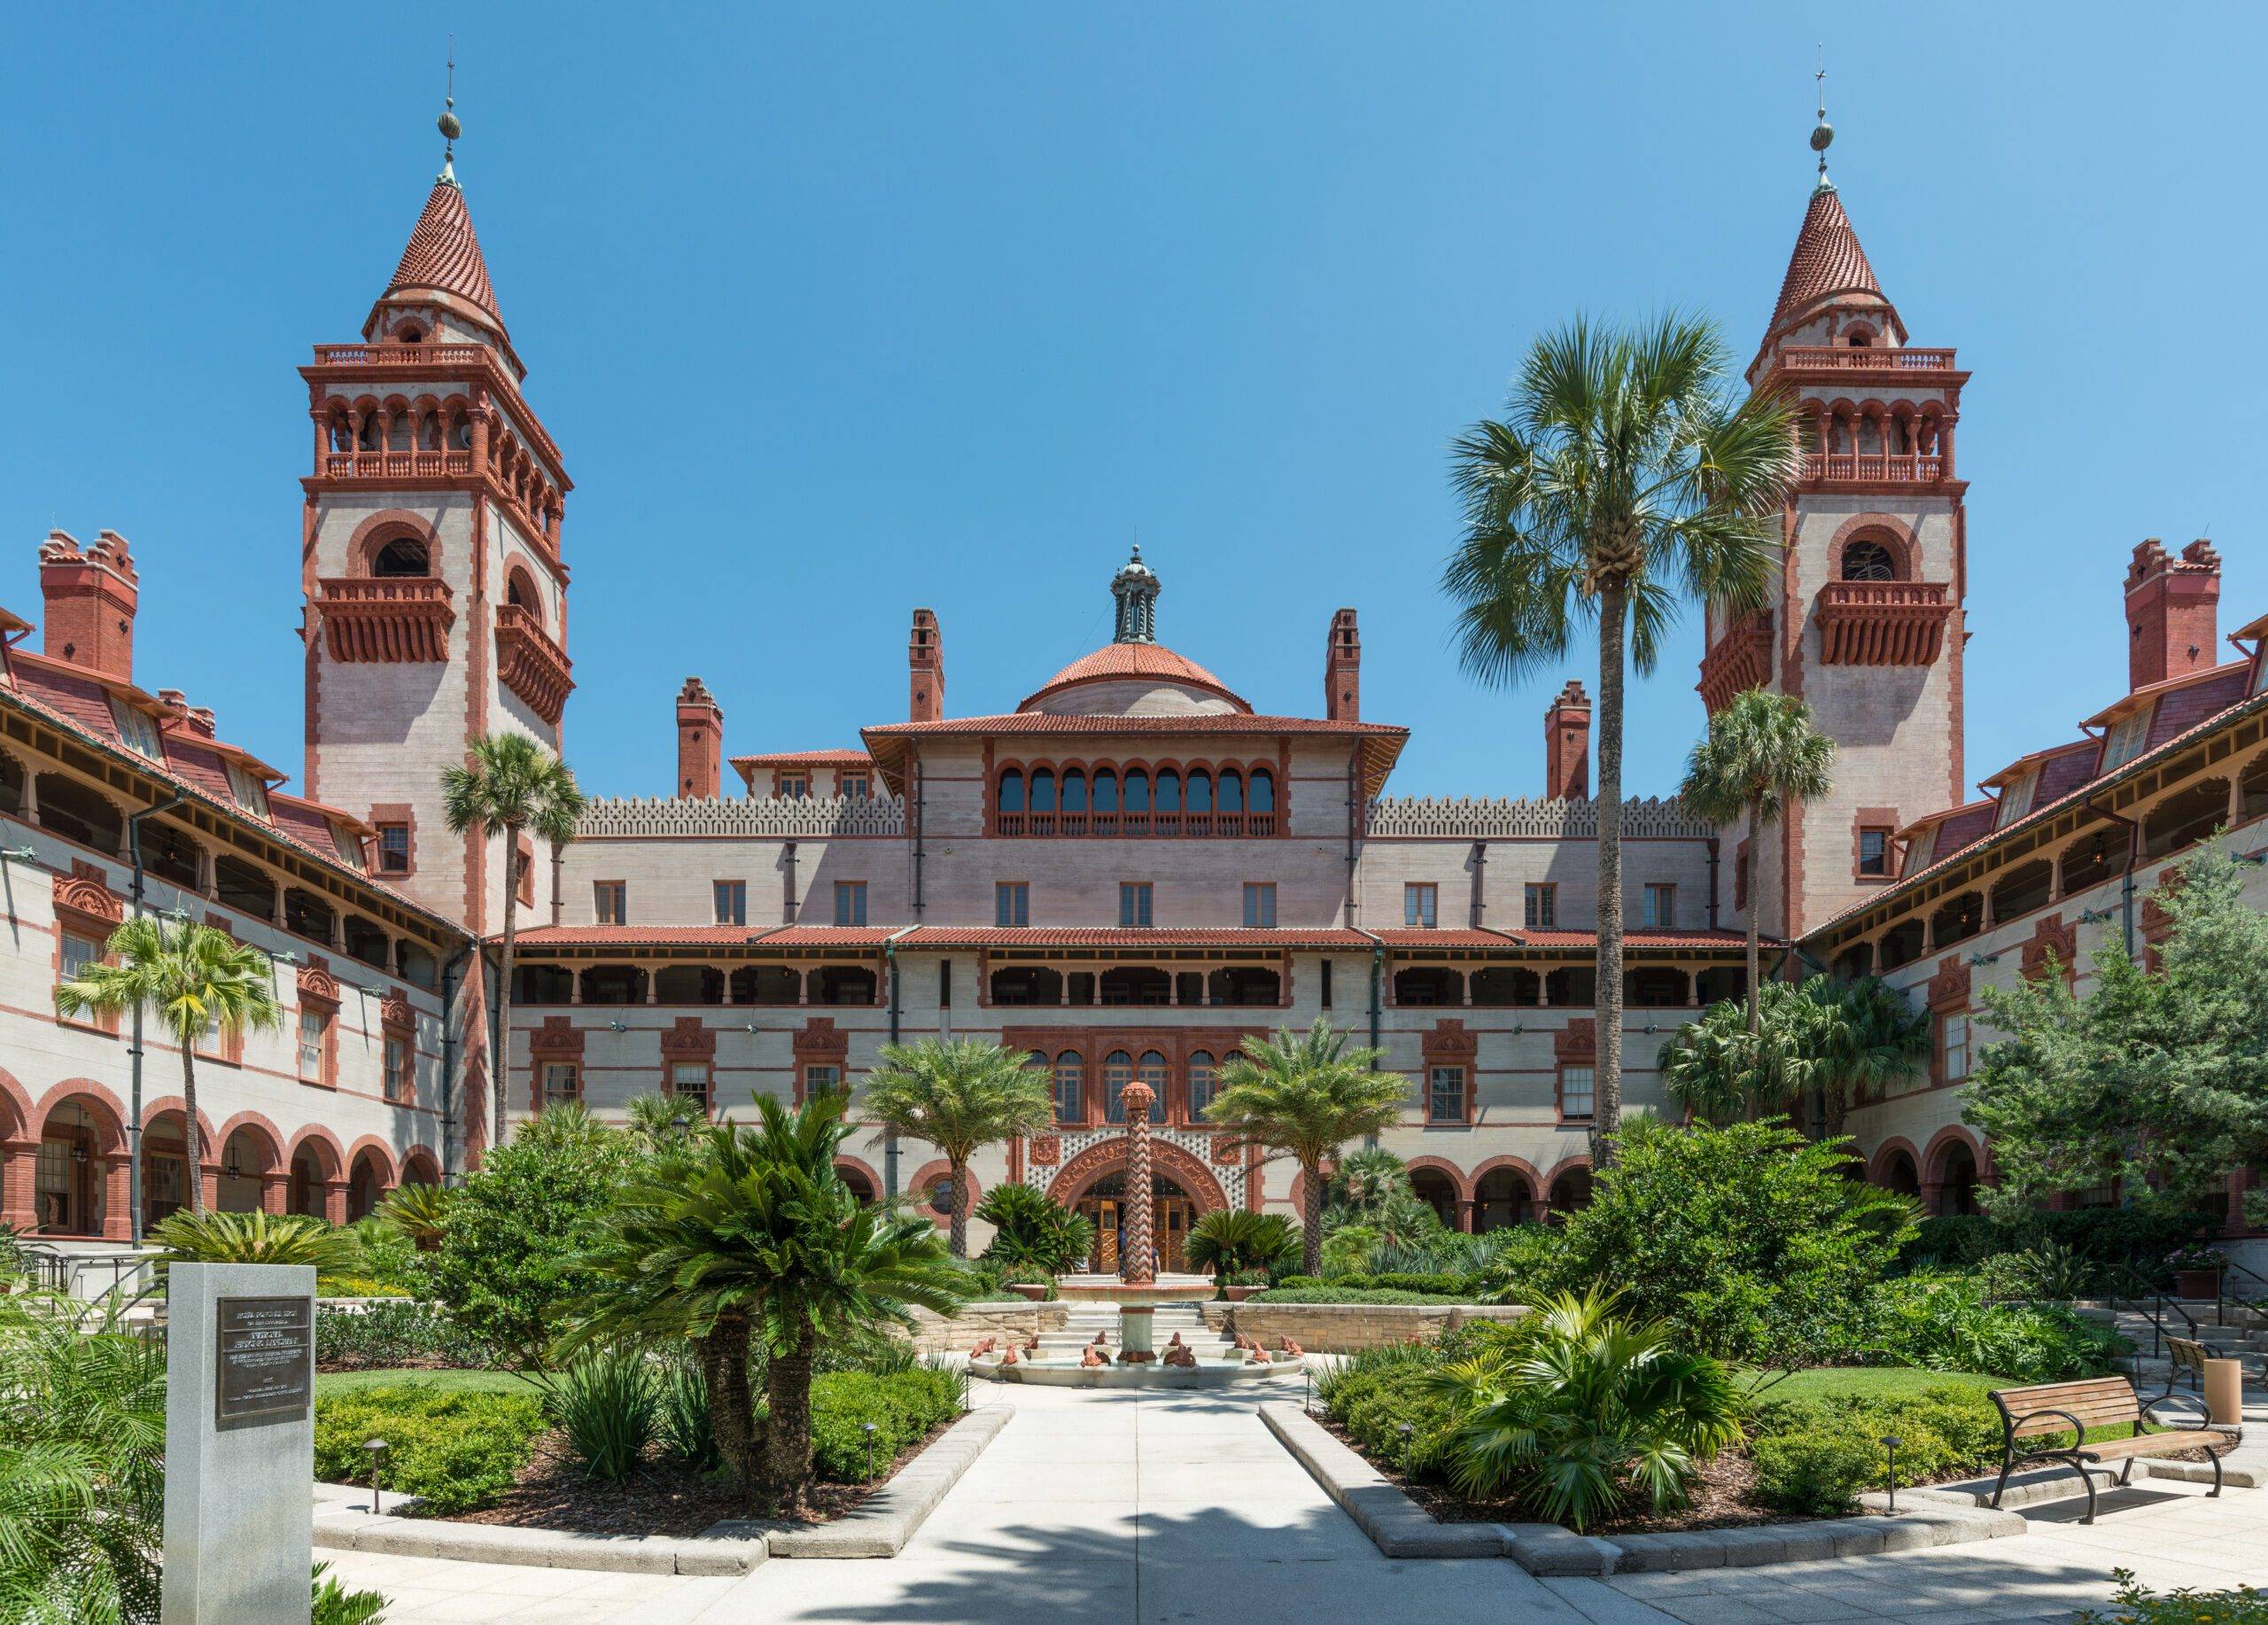 Unraveling the Ponce de Leon Hotel, 1888: Flagler College’s Architectural Masterpiece